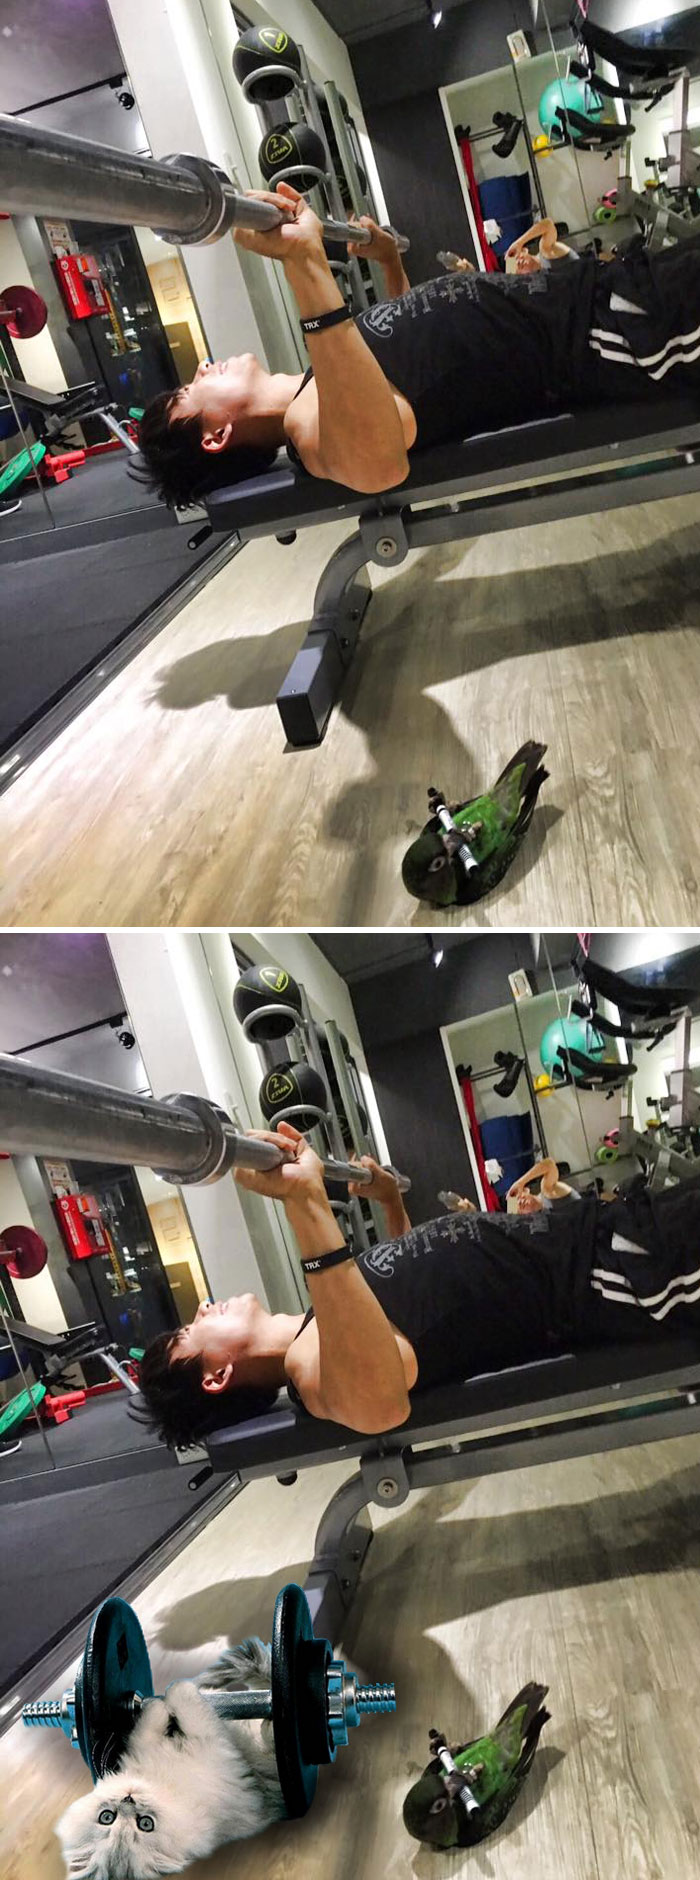 A Parrot Trying To Gym Like Human